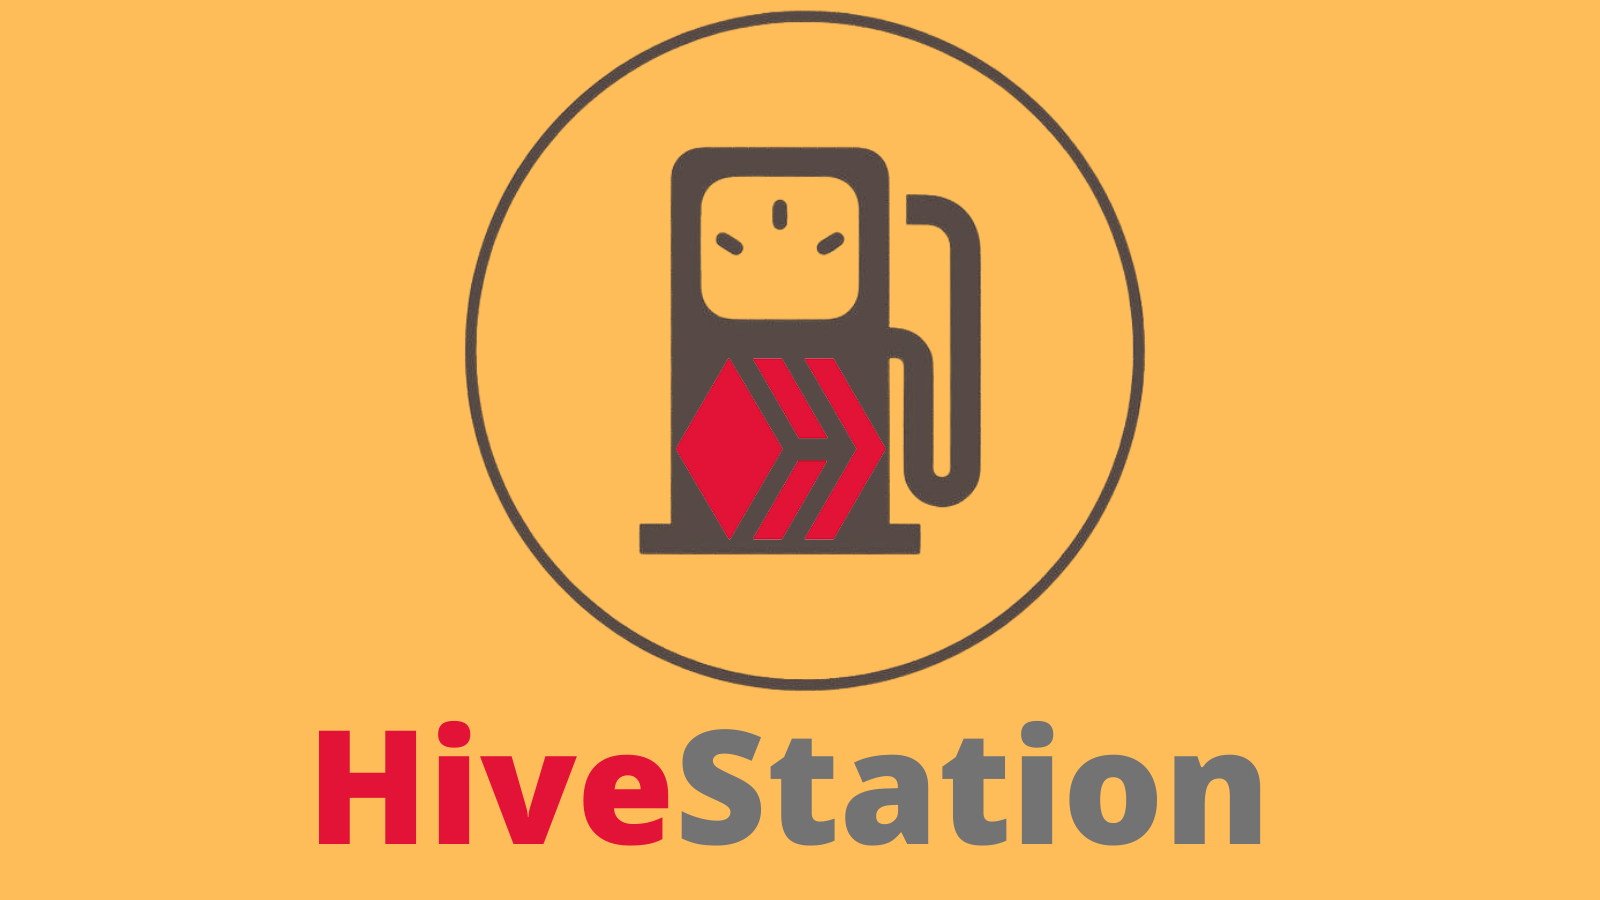 hive station need for hive in crypto.png